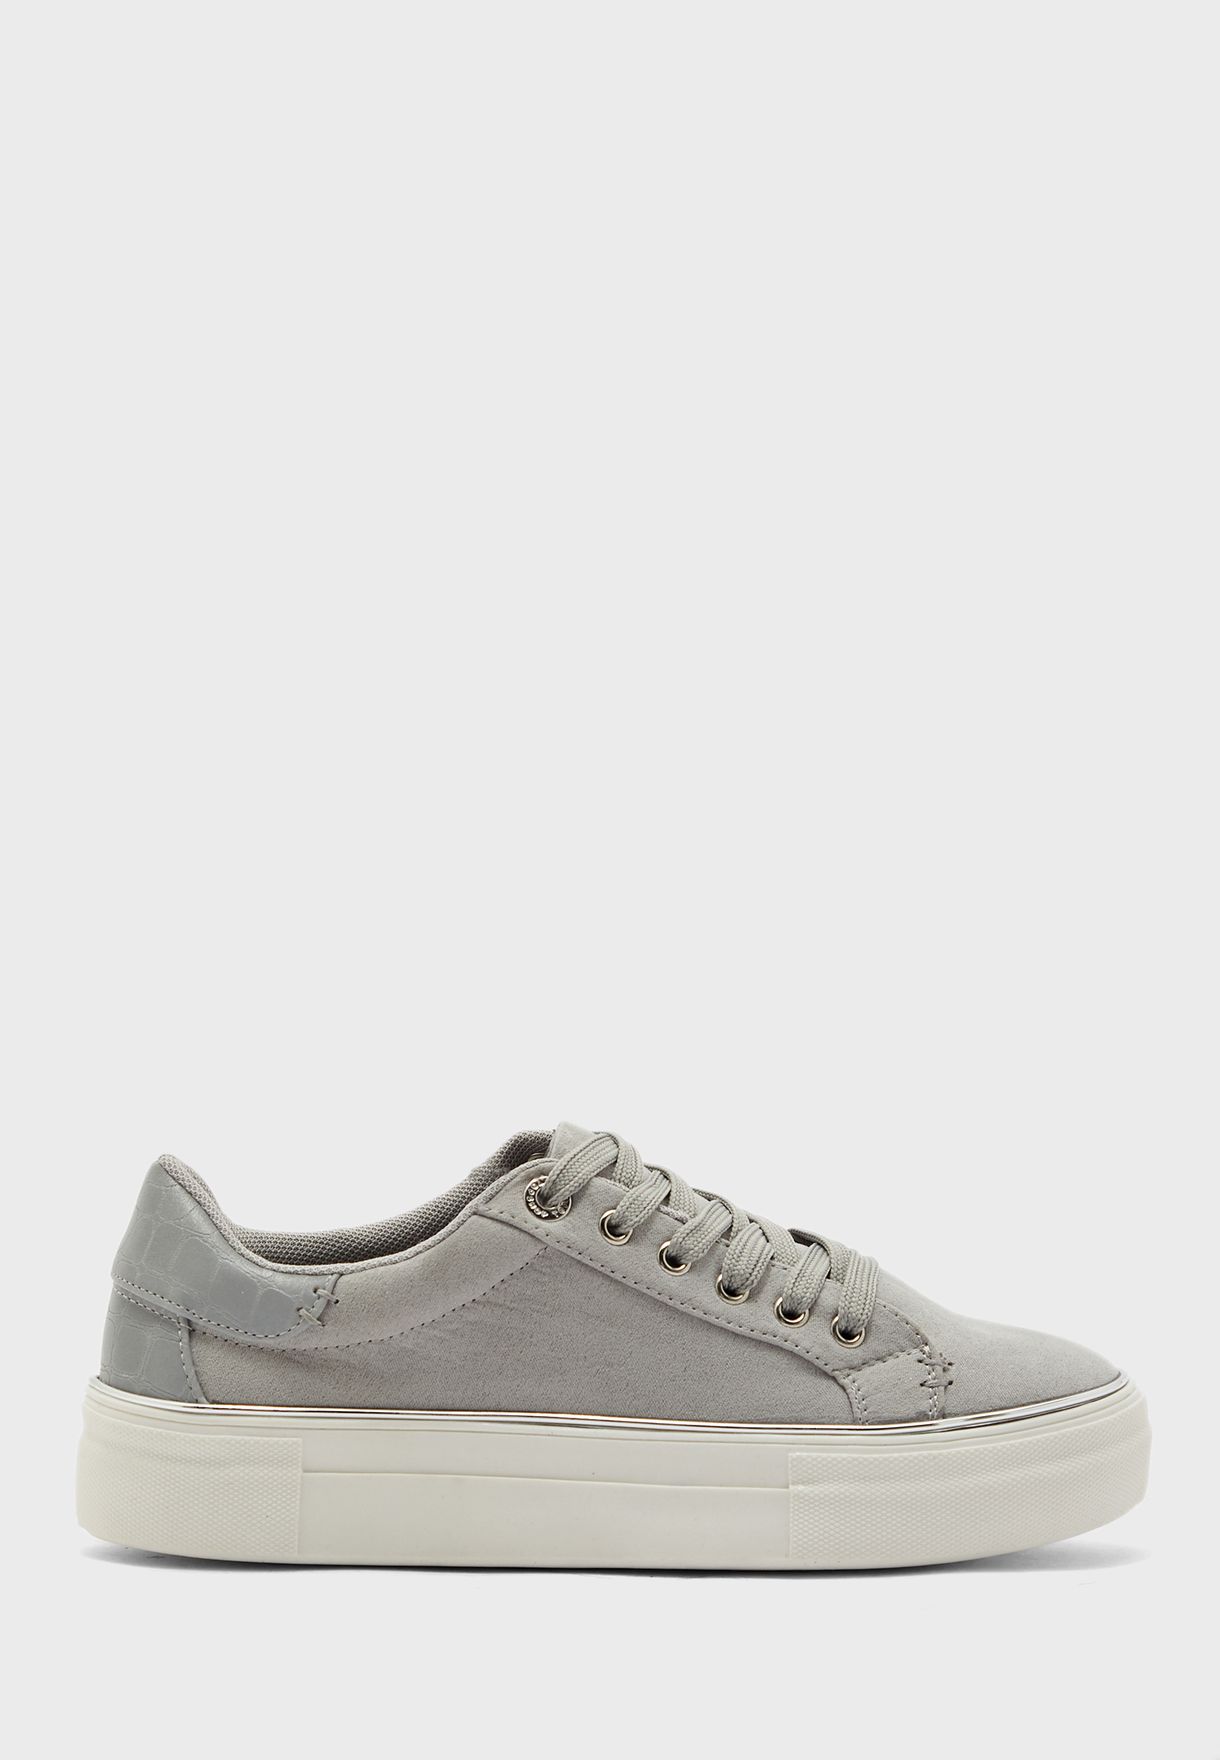 Buy Topshop grey Clover Lace Up Sneaker 